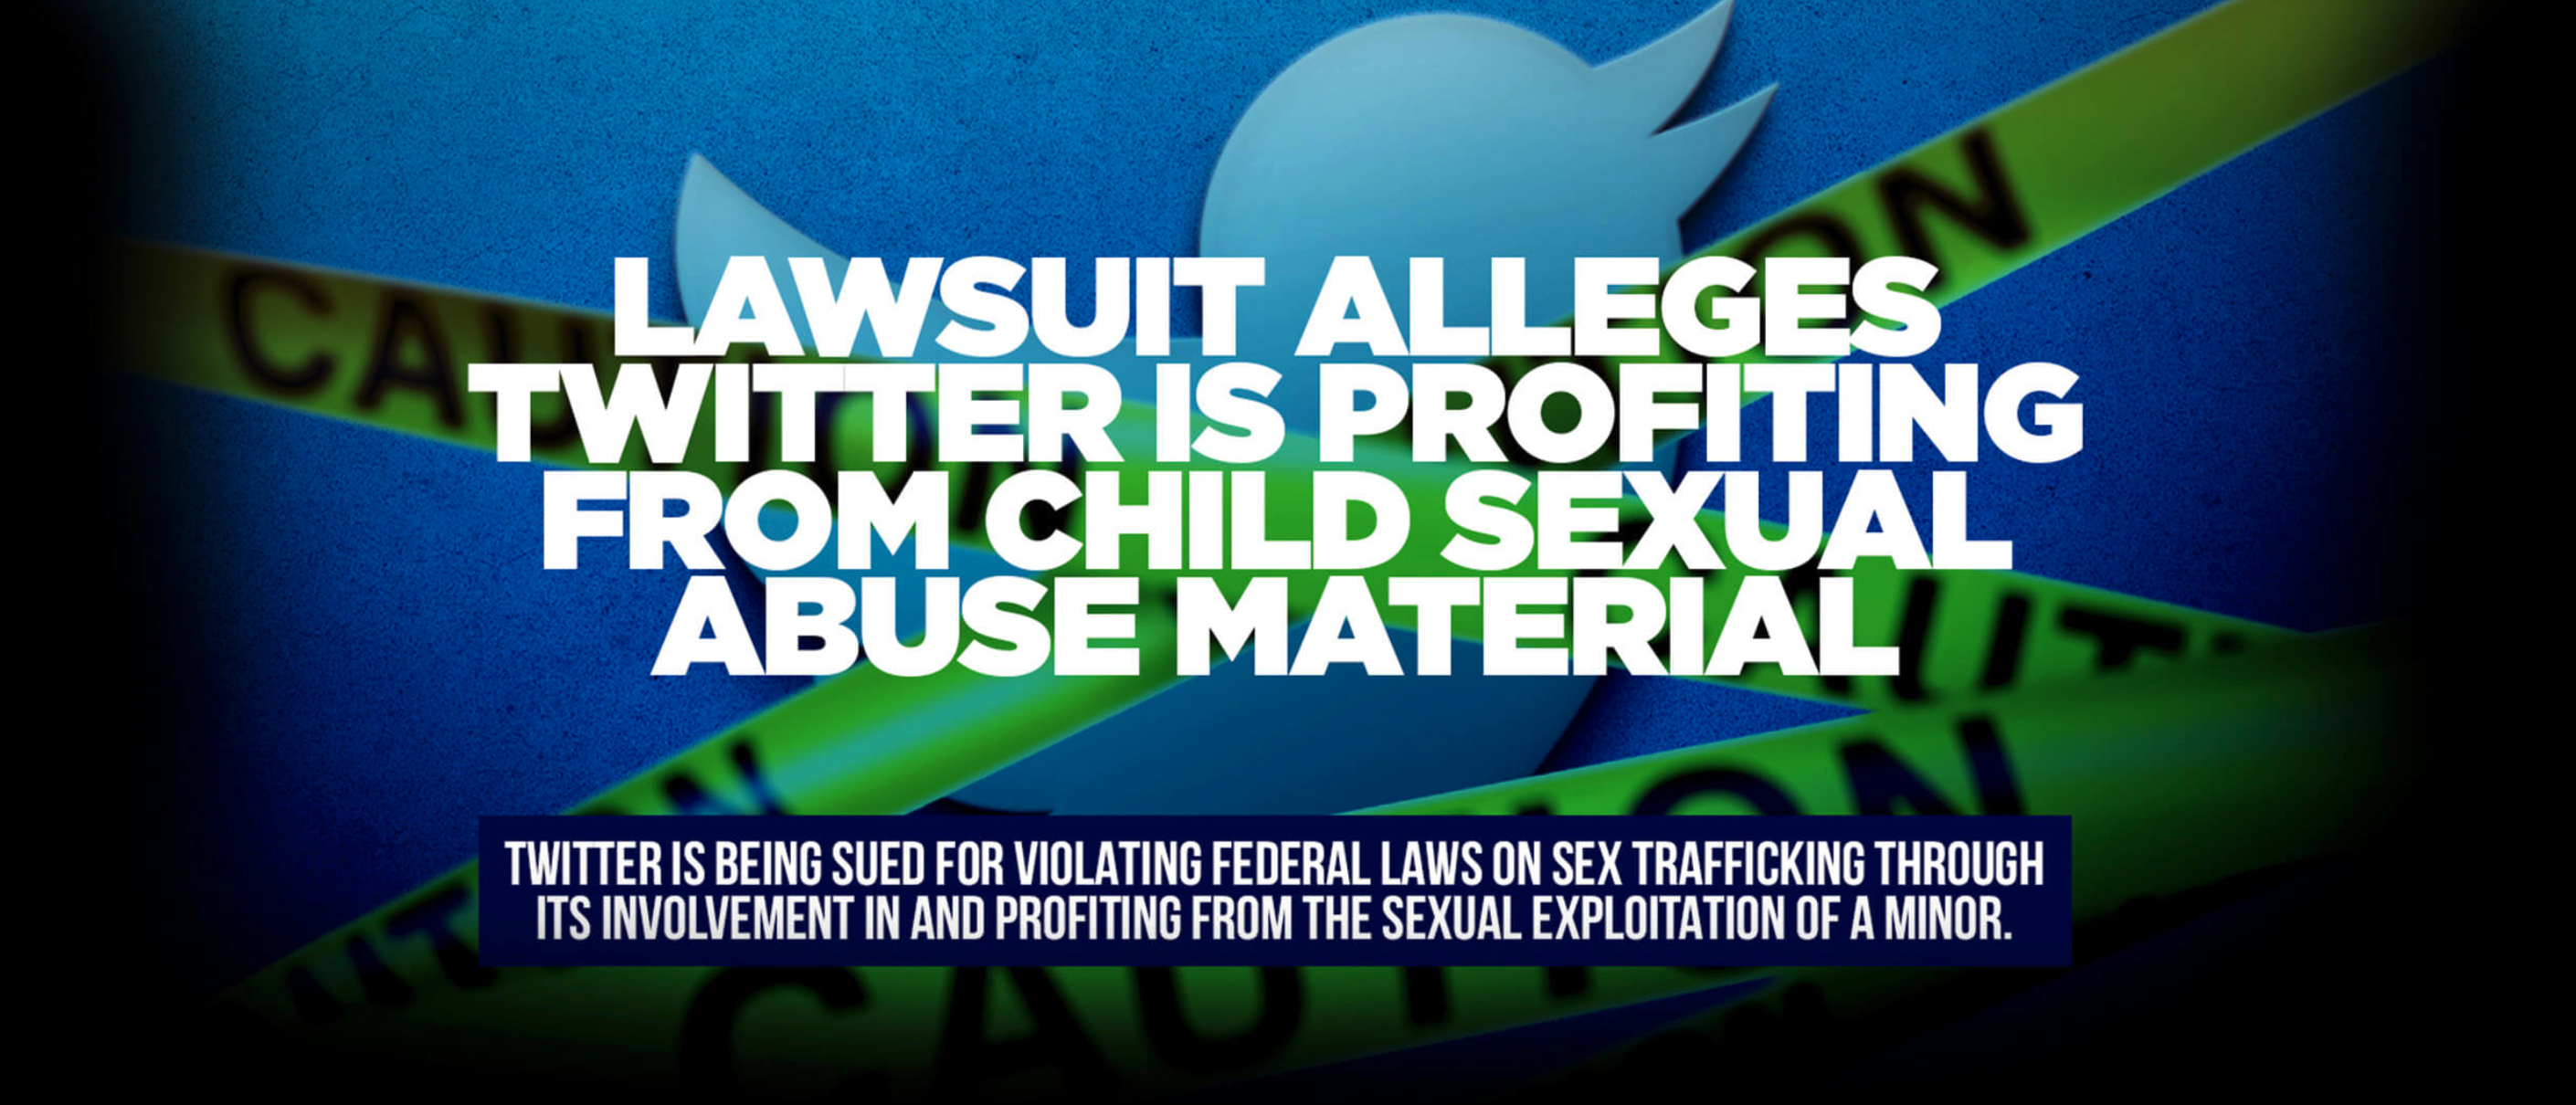 Twitter Is Profiting from Child Sexual Abuse Material: Twitter is being sued by the National Center on Sexual Exploitation Law Center, on behalf of John Doe, for violating federal law on sex trafficking through its involvement in and profiting from the sexual exploitation of a minor.